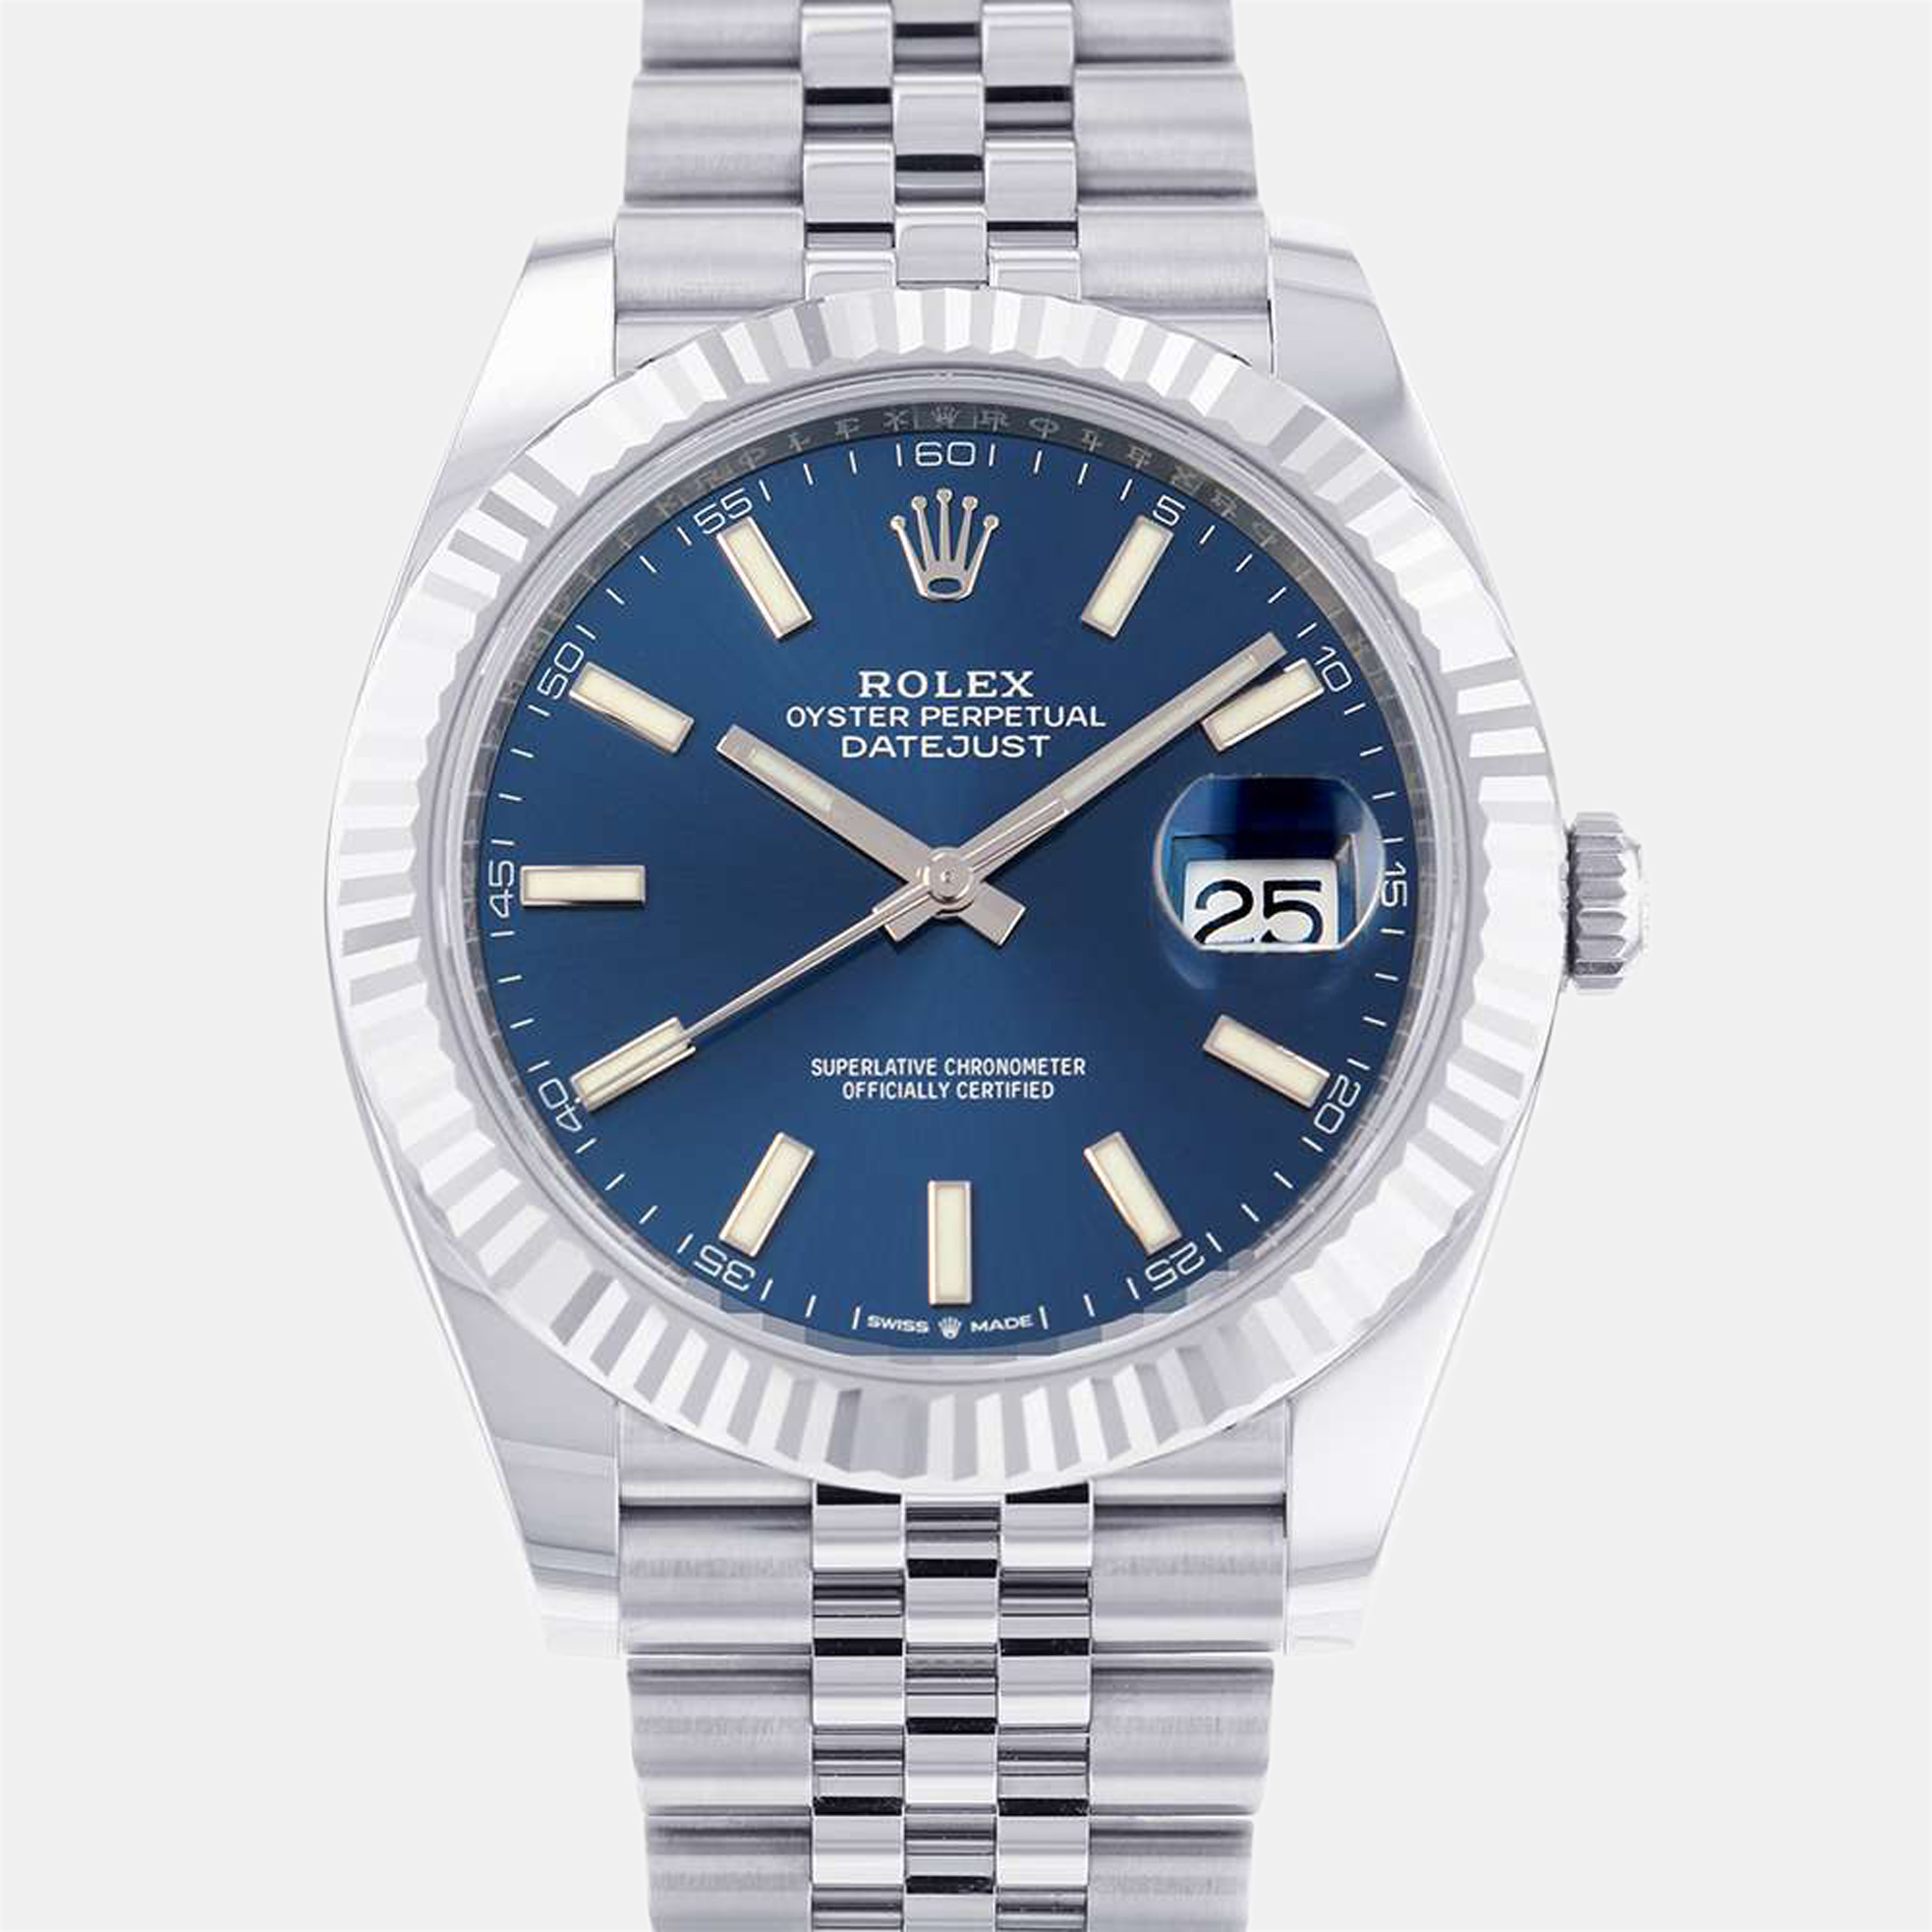 Rolex Blue 18K White Gold And Stainless Steel Datejust 126334 Men's Wristwatch 41 Mm